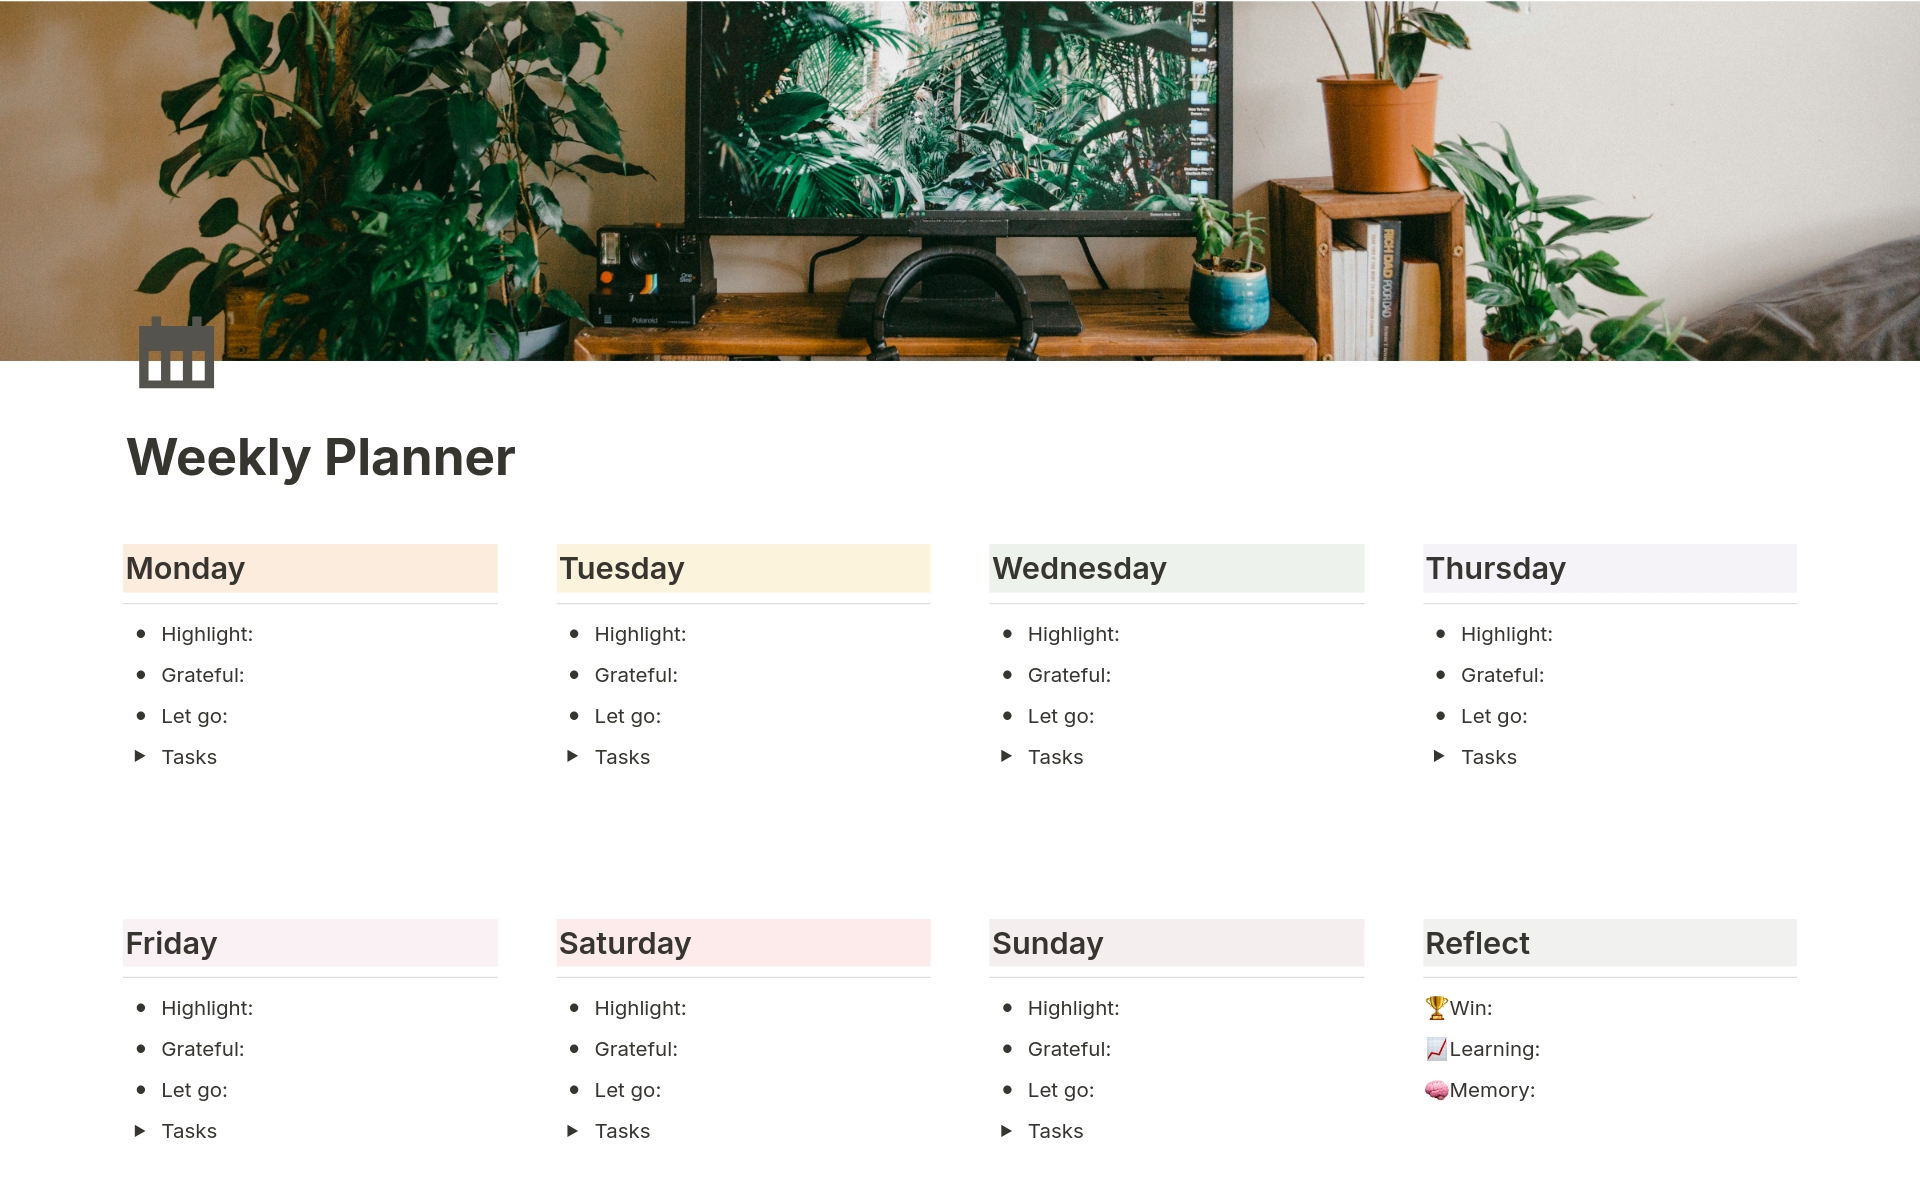 The Weekly Planner is your go-to tool designed to streamline and optimize your week effortlessly, offering a simple and intuitive template without complex databases or overwhelming features.